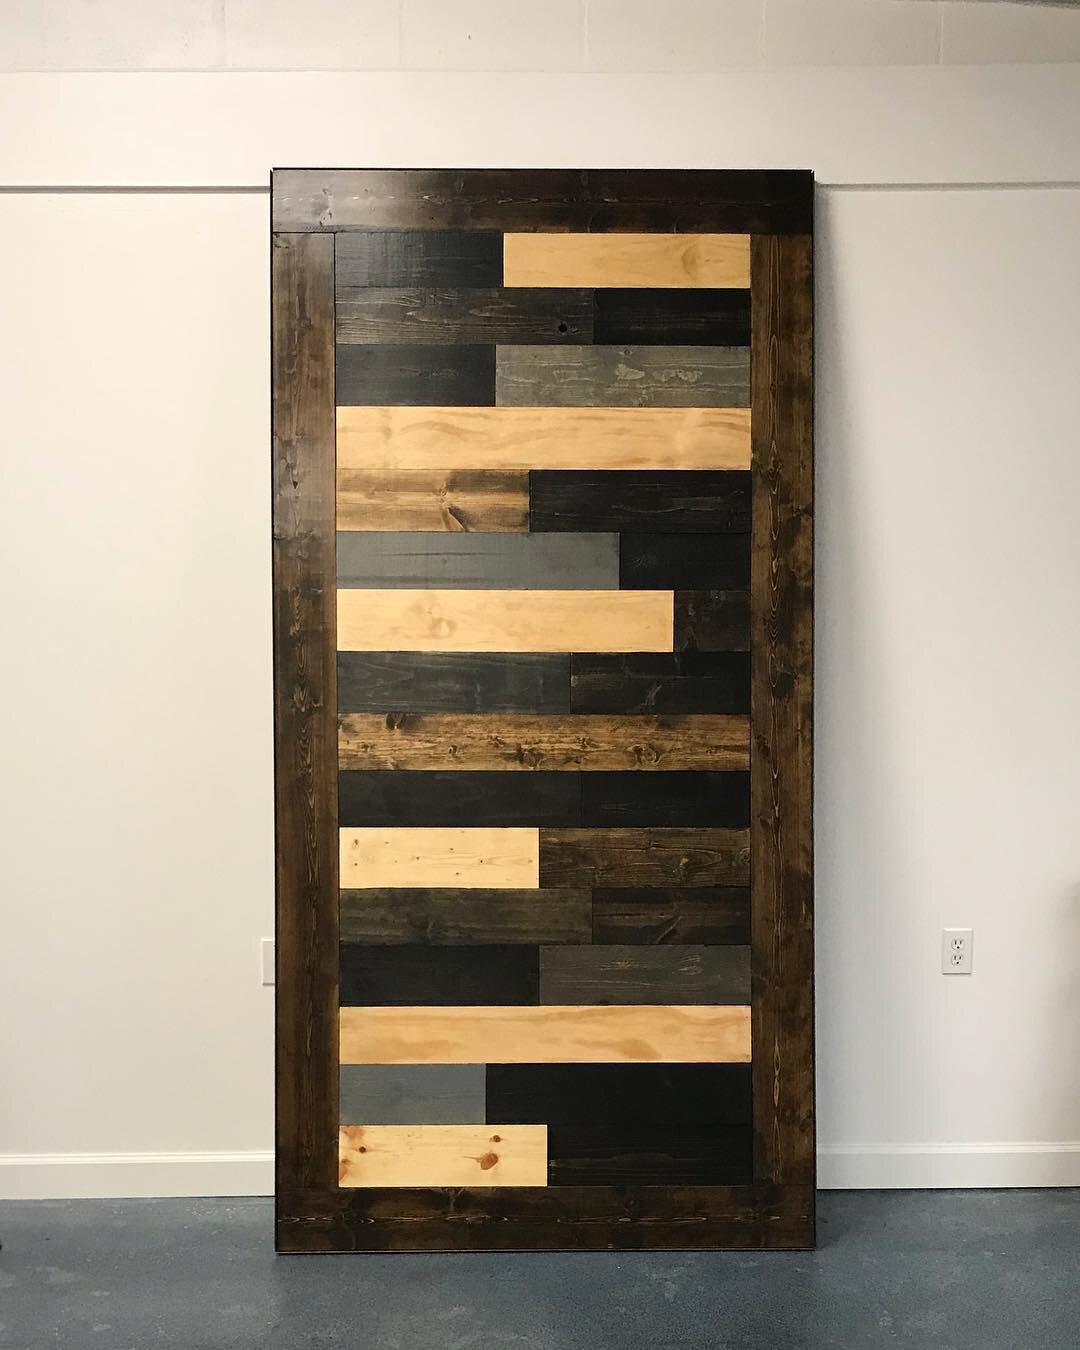 Undecided about what color door you want? Pick lots of colors! This staggered plank door looks so amazing with its dark walnut border and all of our speciality stain finishes. #barndoors